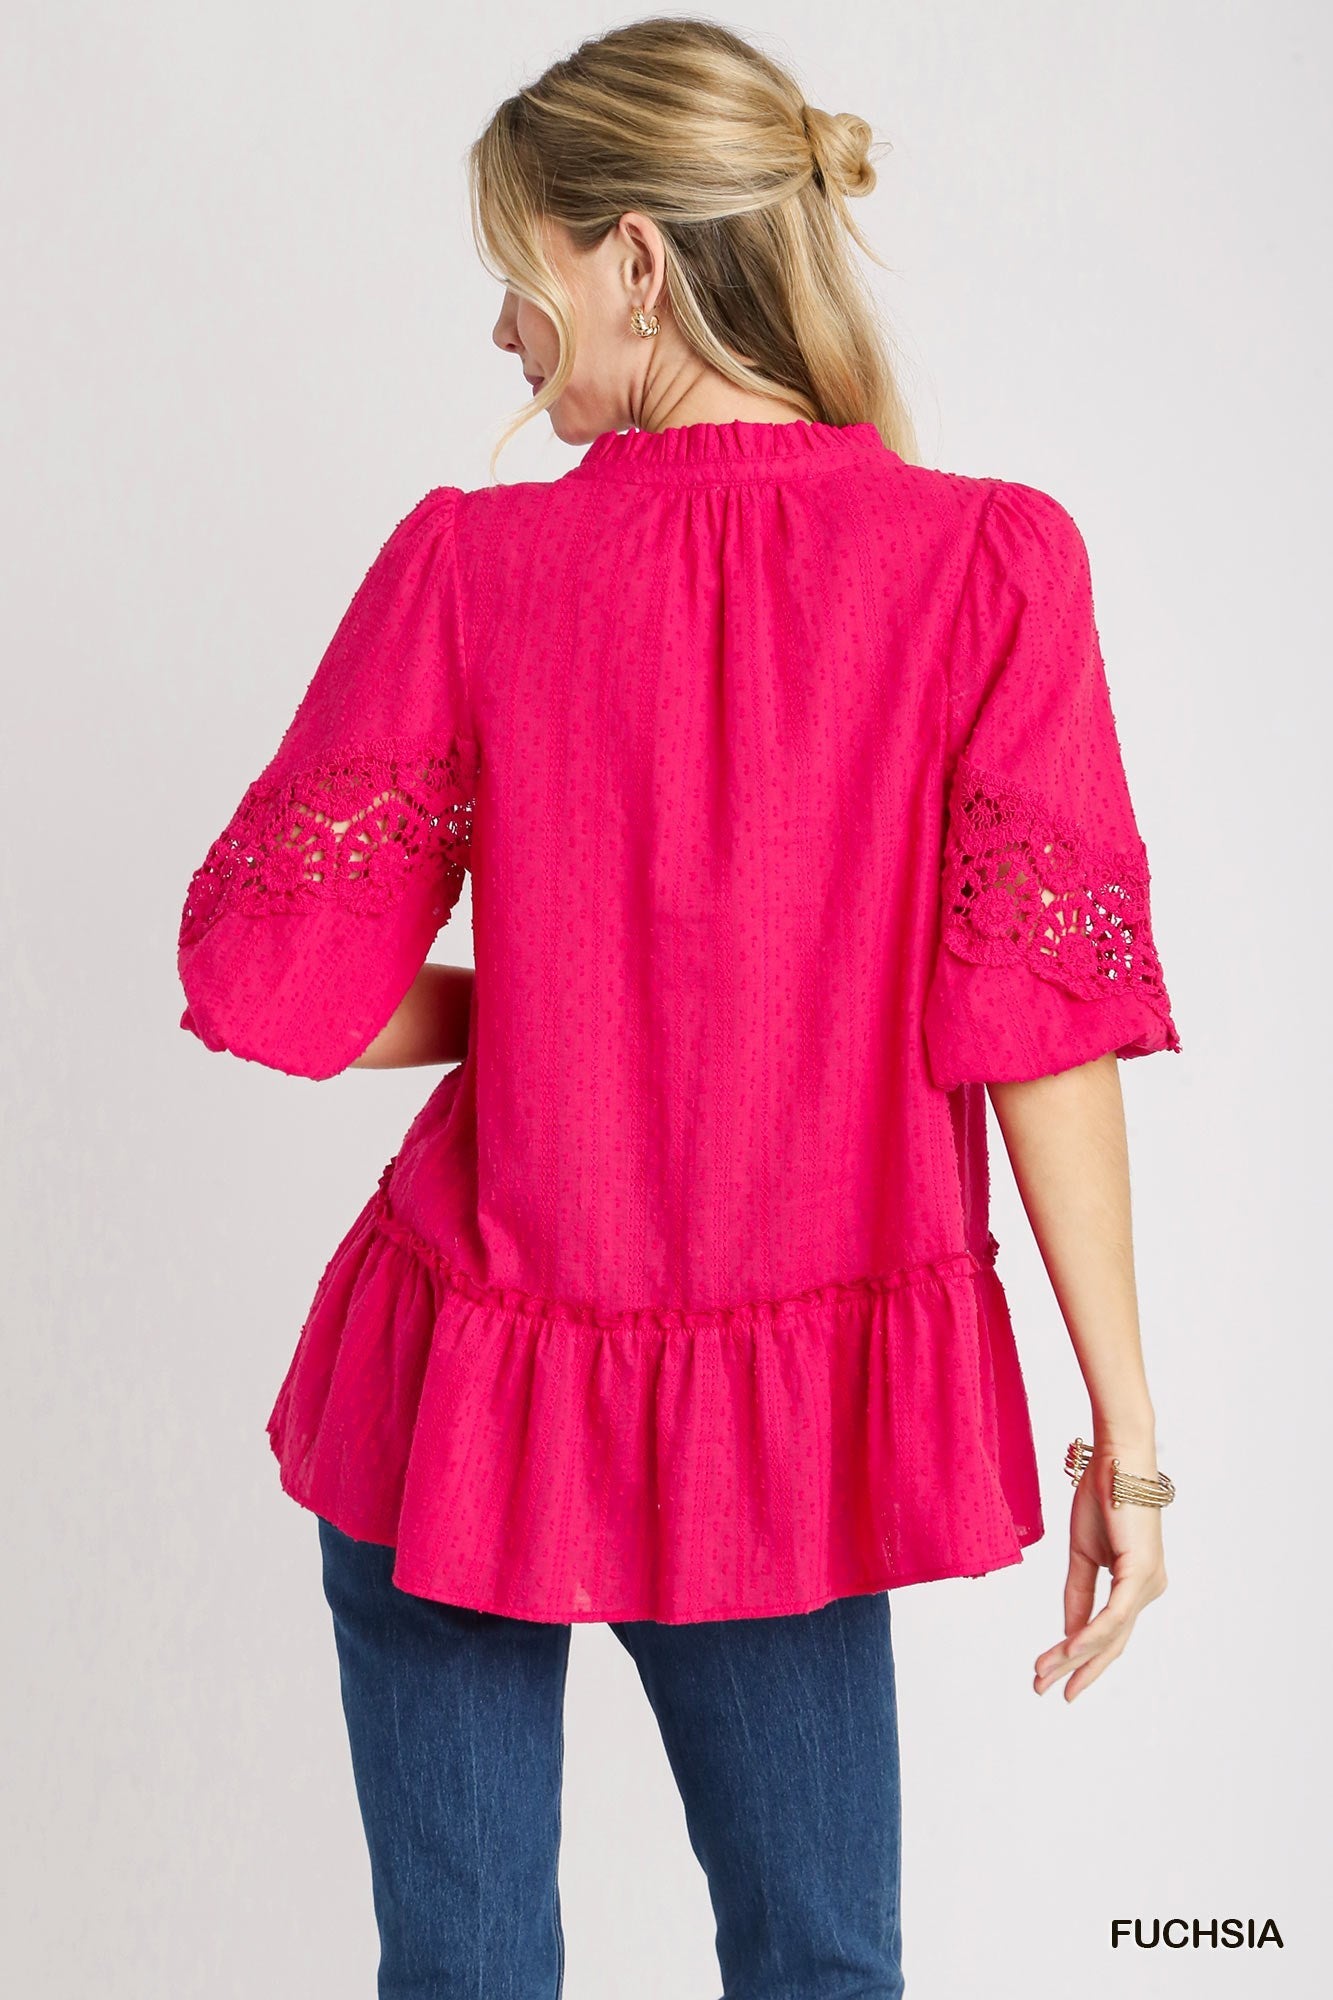 Swiss Dot Cotton Top Bell Ruffle Sleeve with Lace Trim & 3/4 Crochet Detailed Puff Sleeves